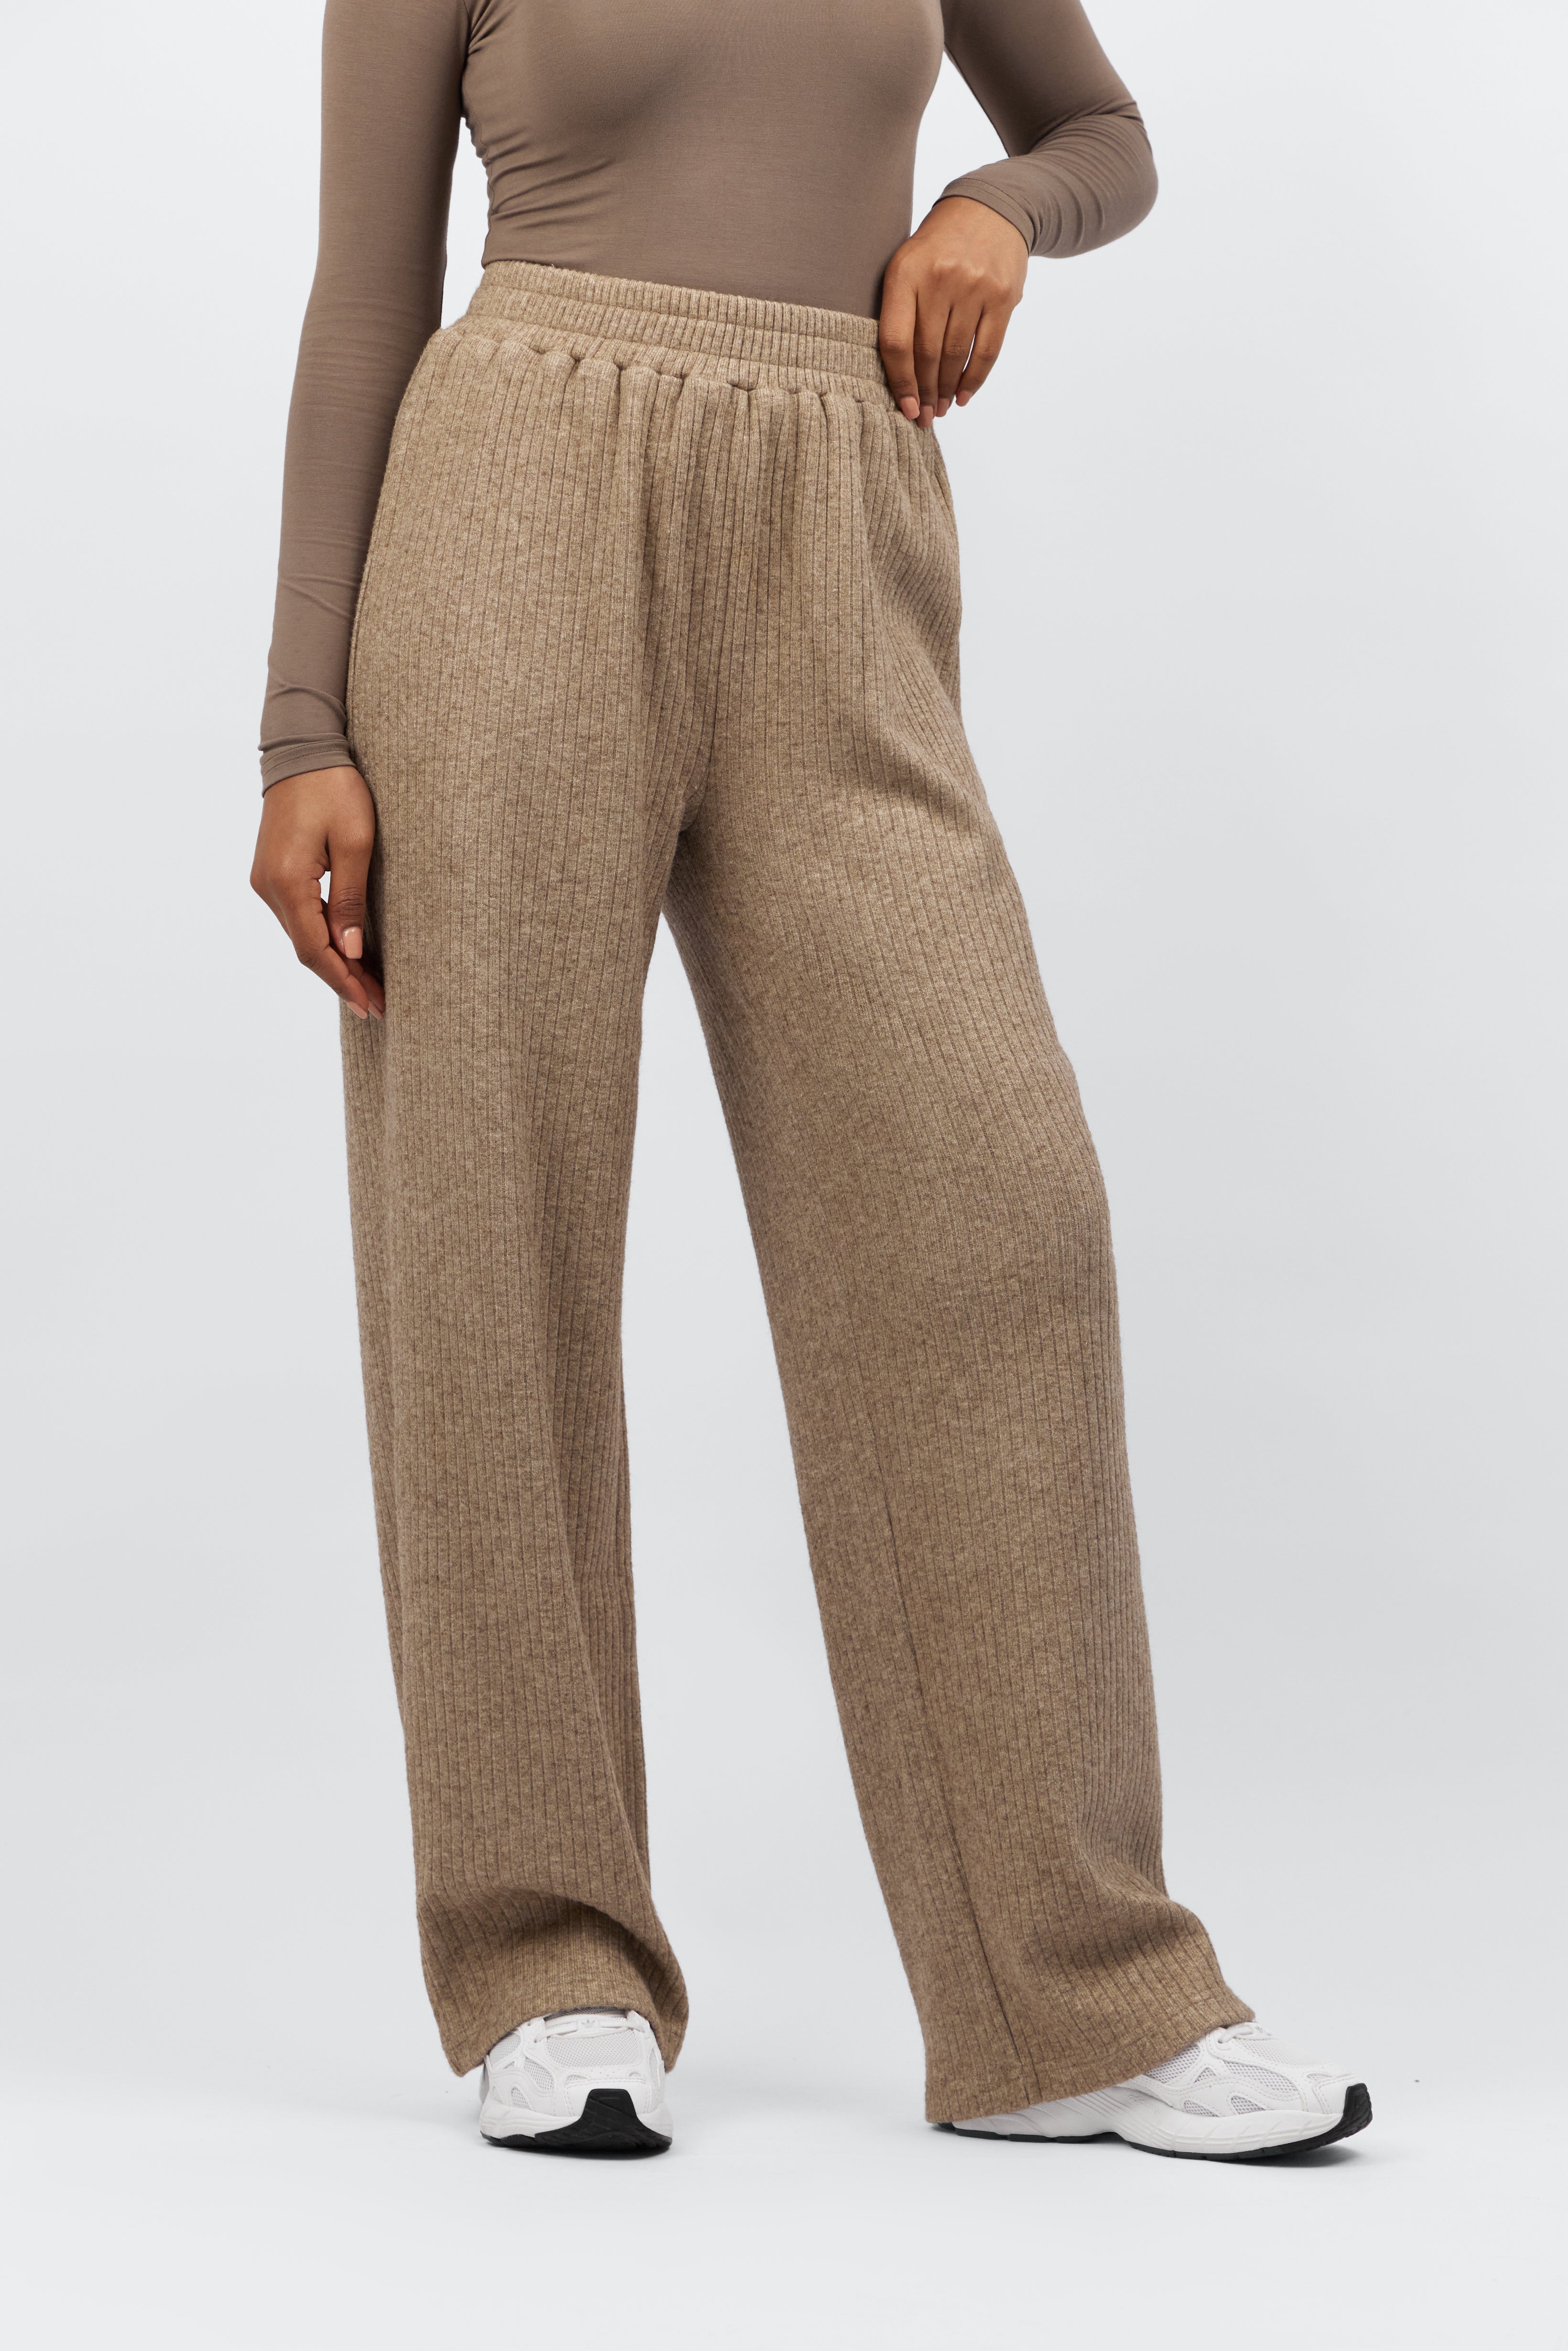 AE - Knit Relaxed Fit Pants - Pecan